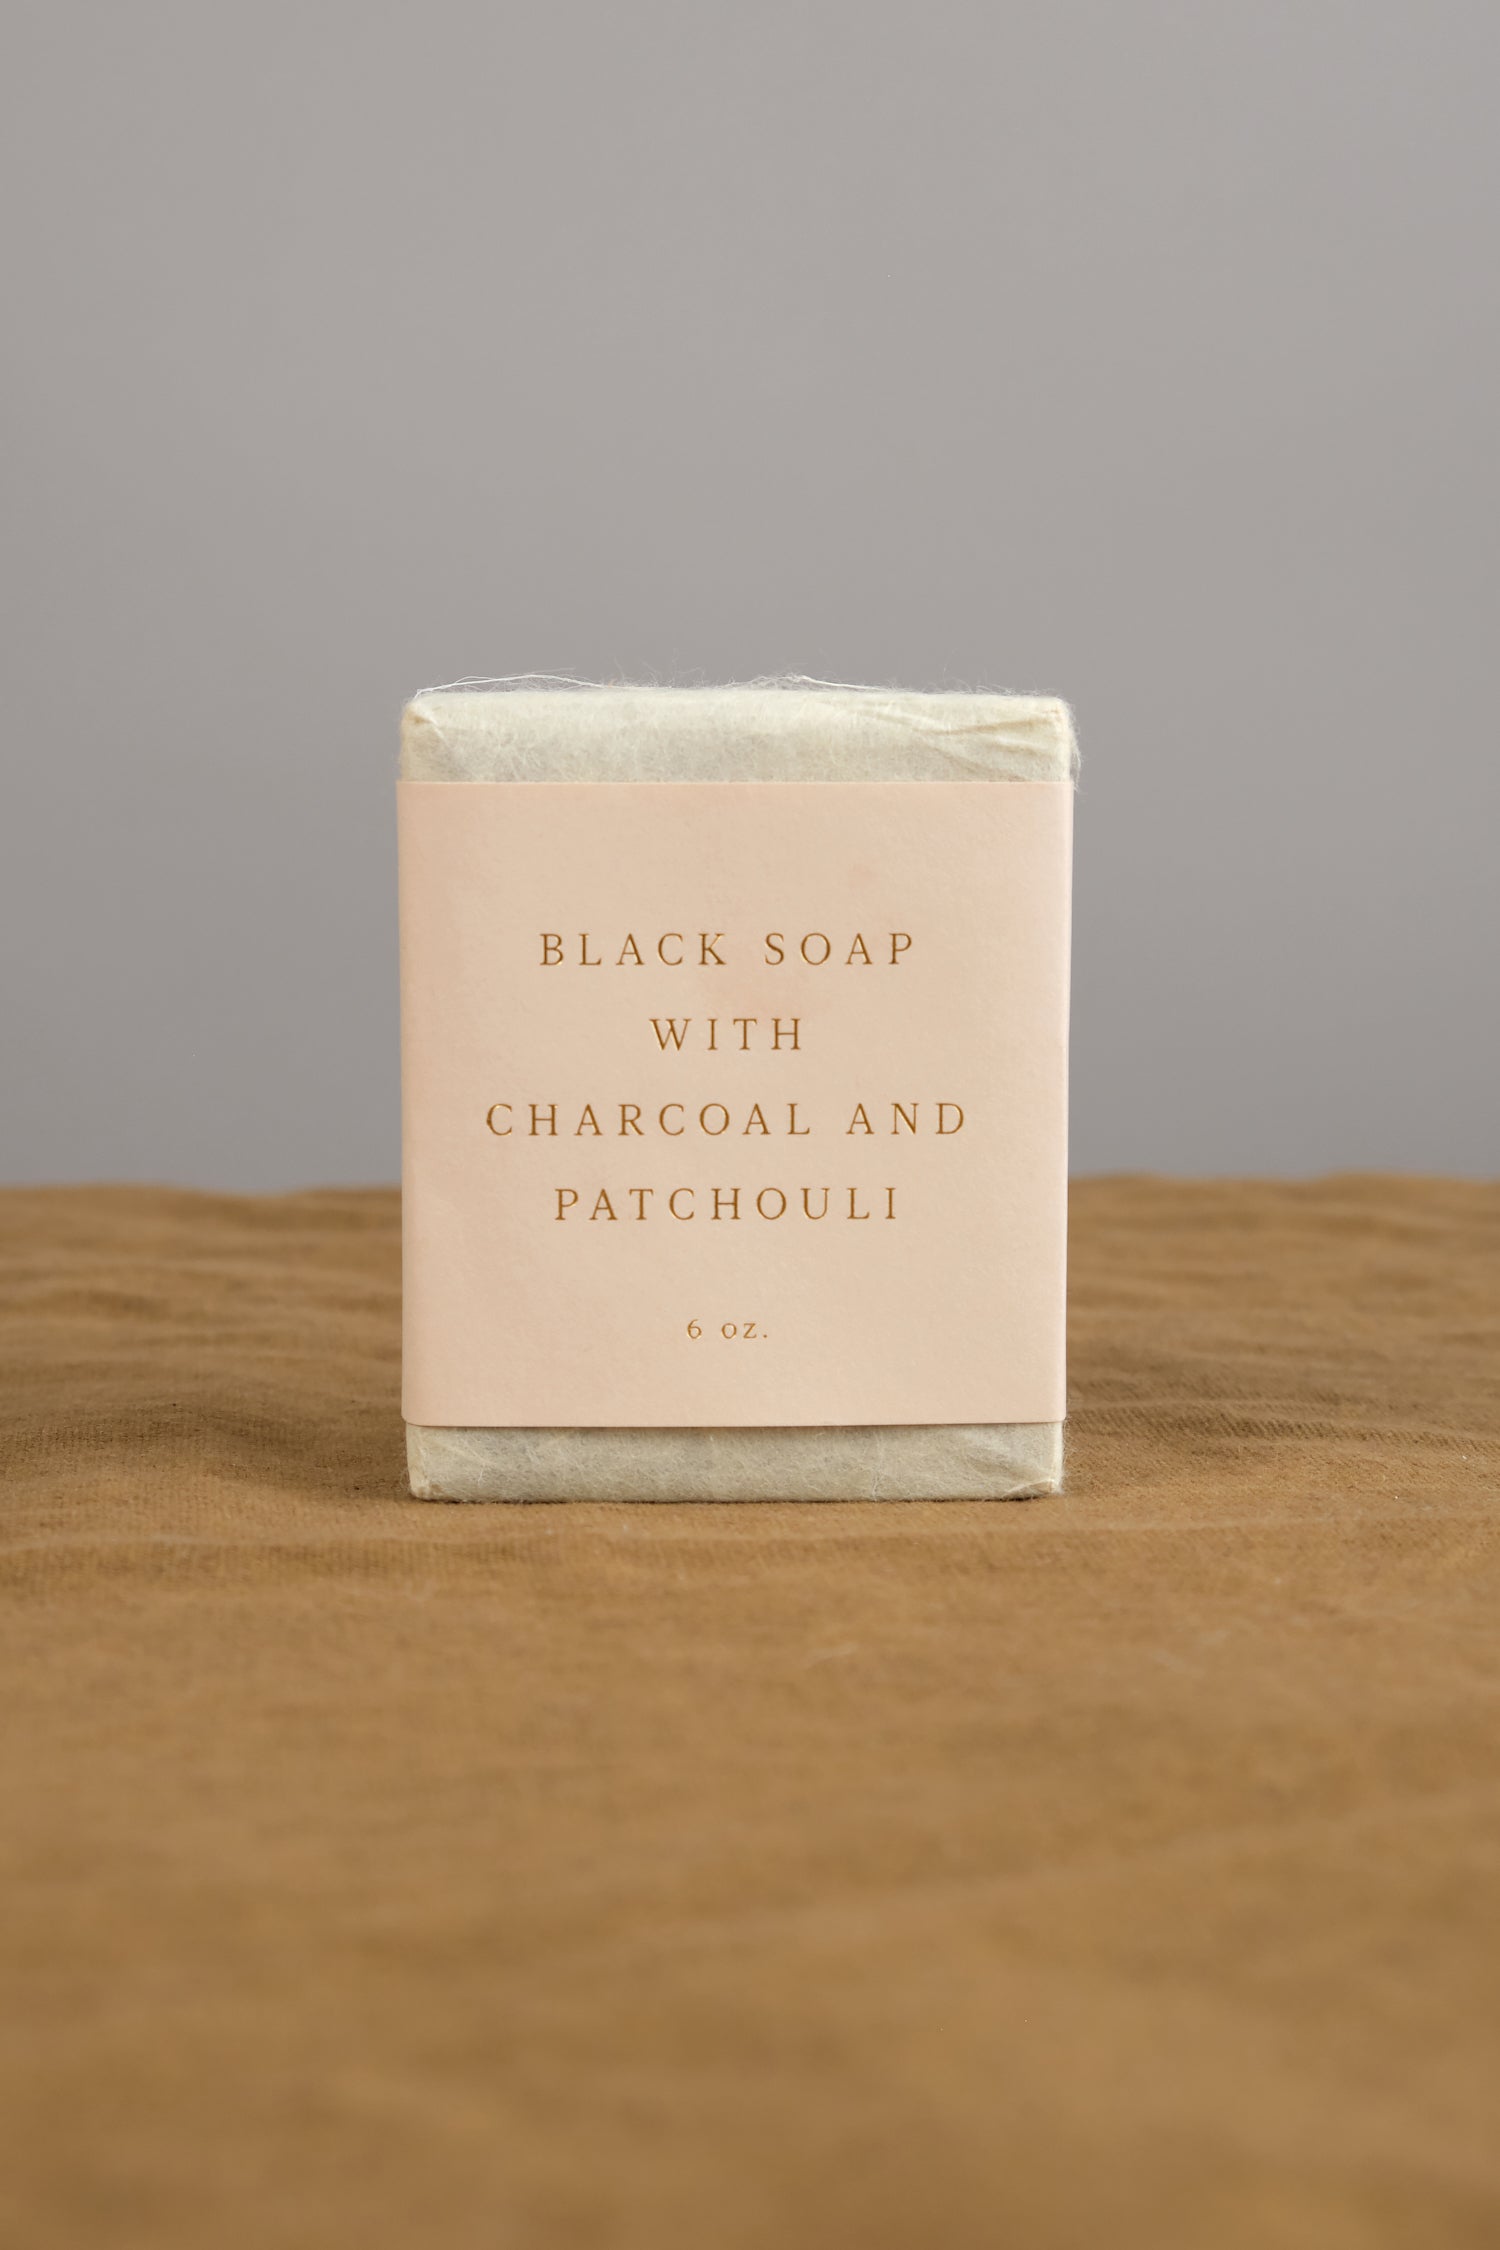 Black Soap with Charcoal and Patchouli